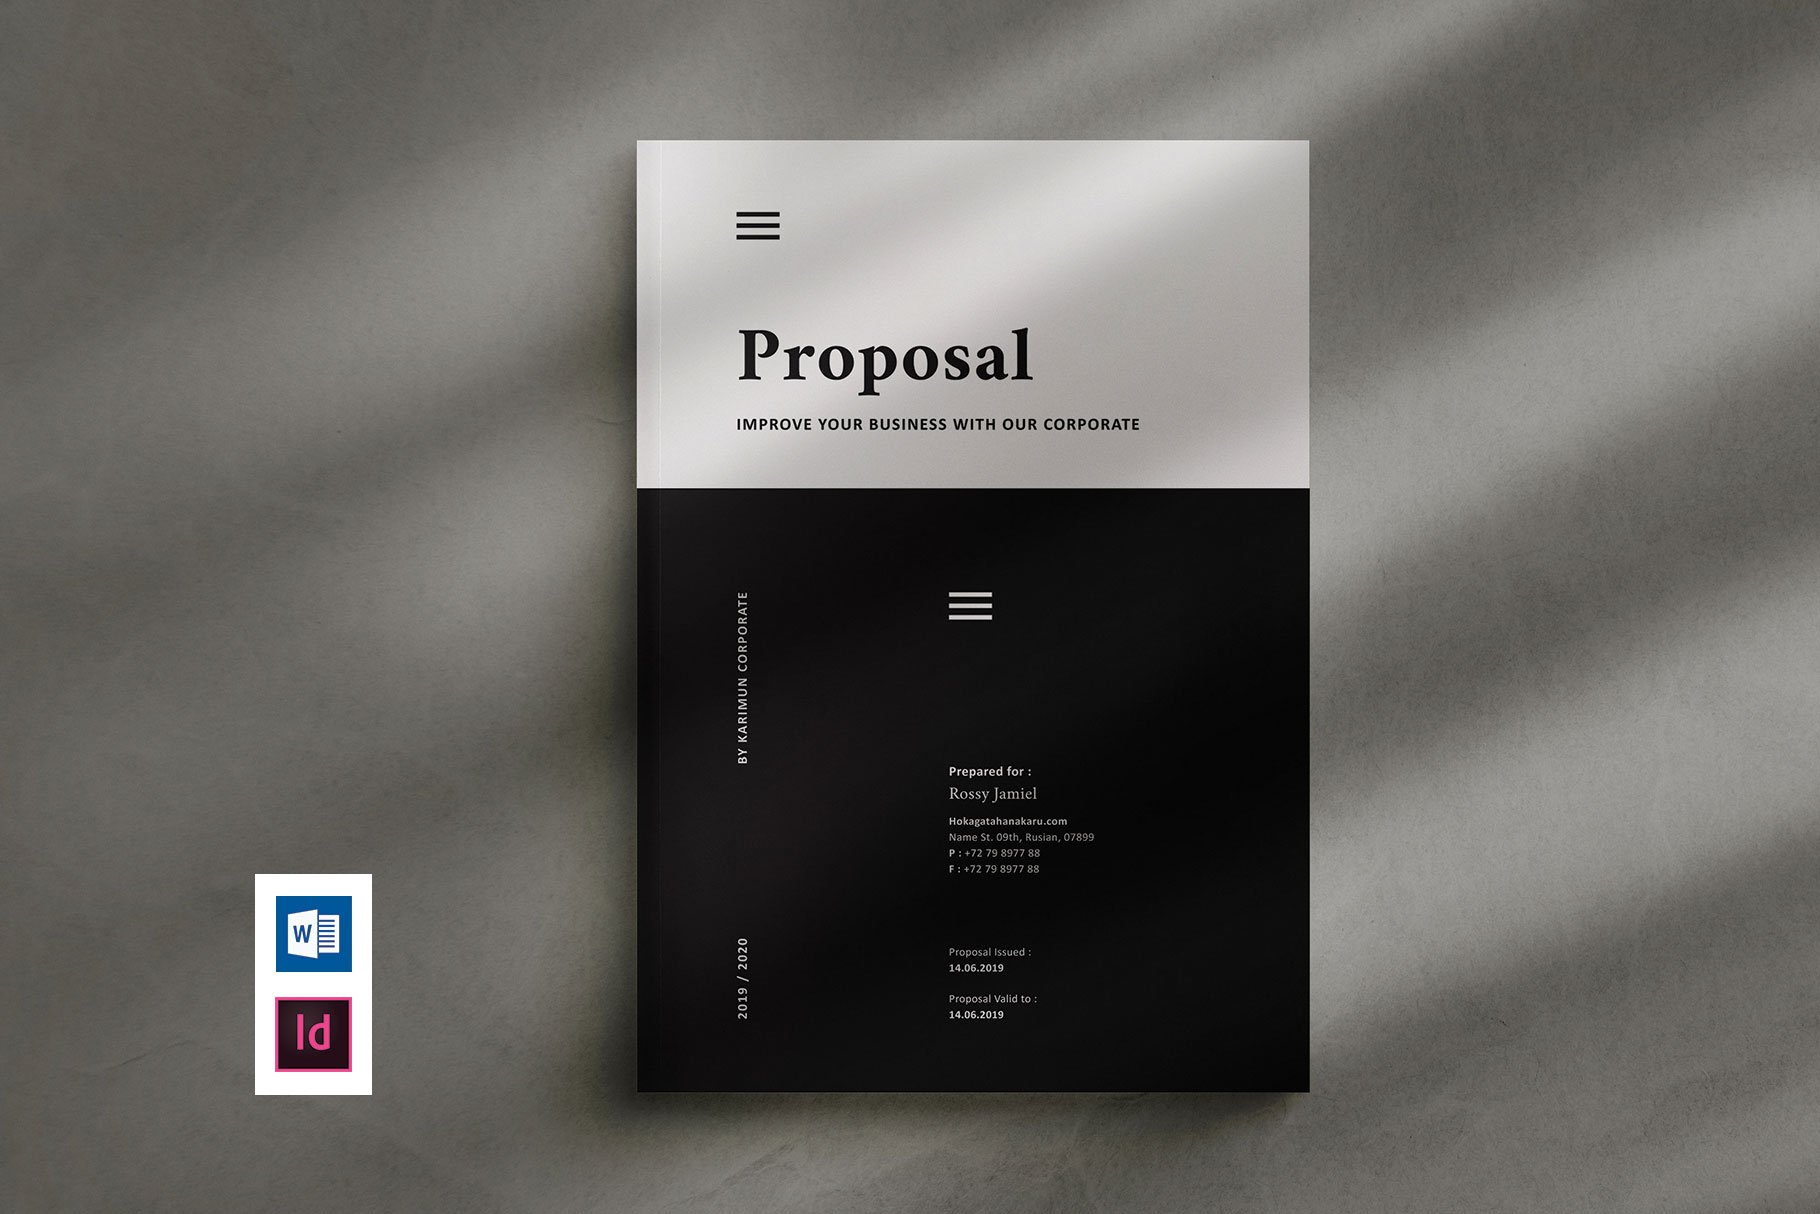 Proposal cover image.